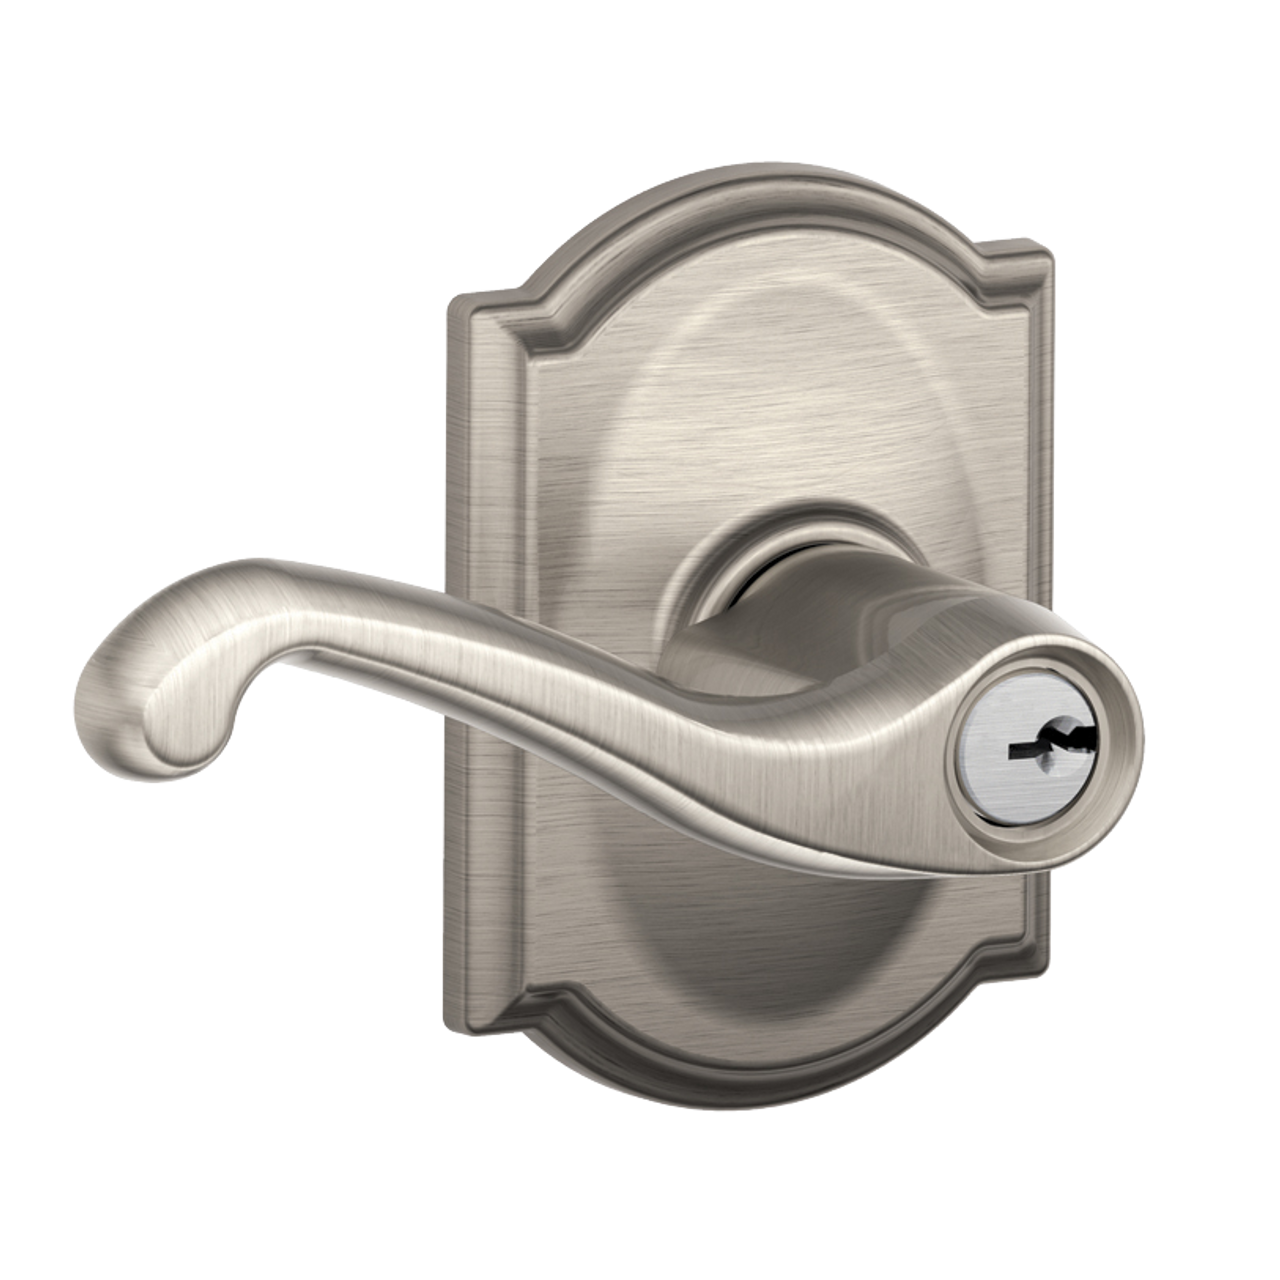 Schlage Keyed Entry Flair Lever Door Lock with Camelot Trim